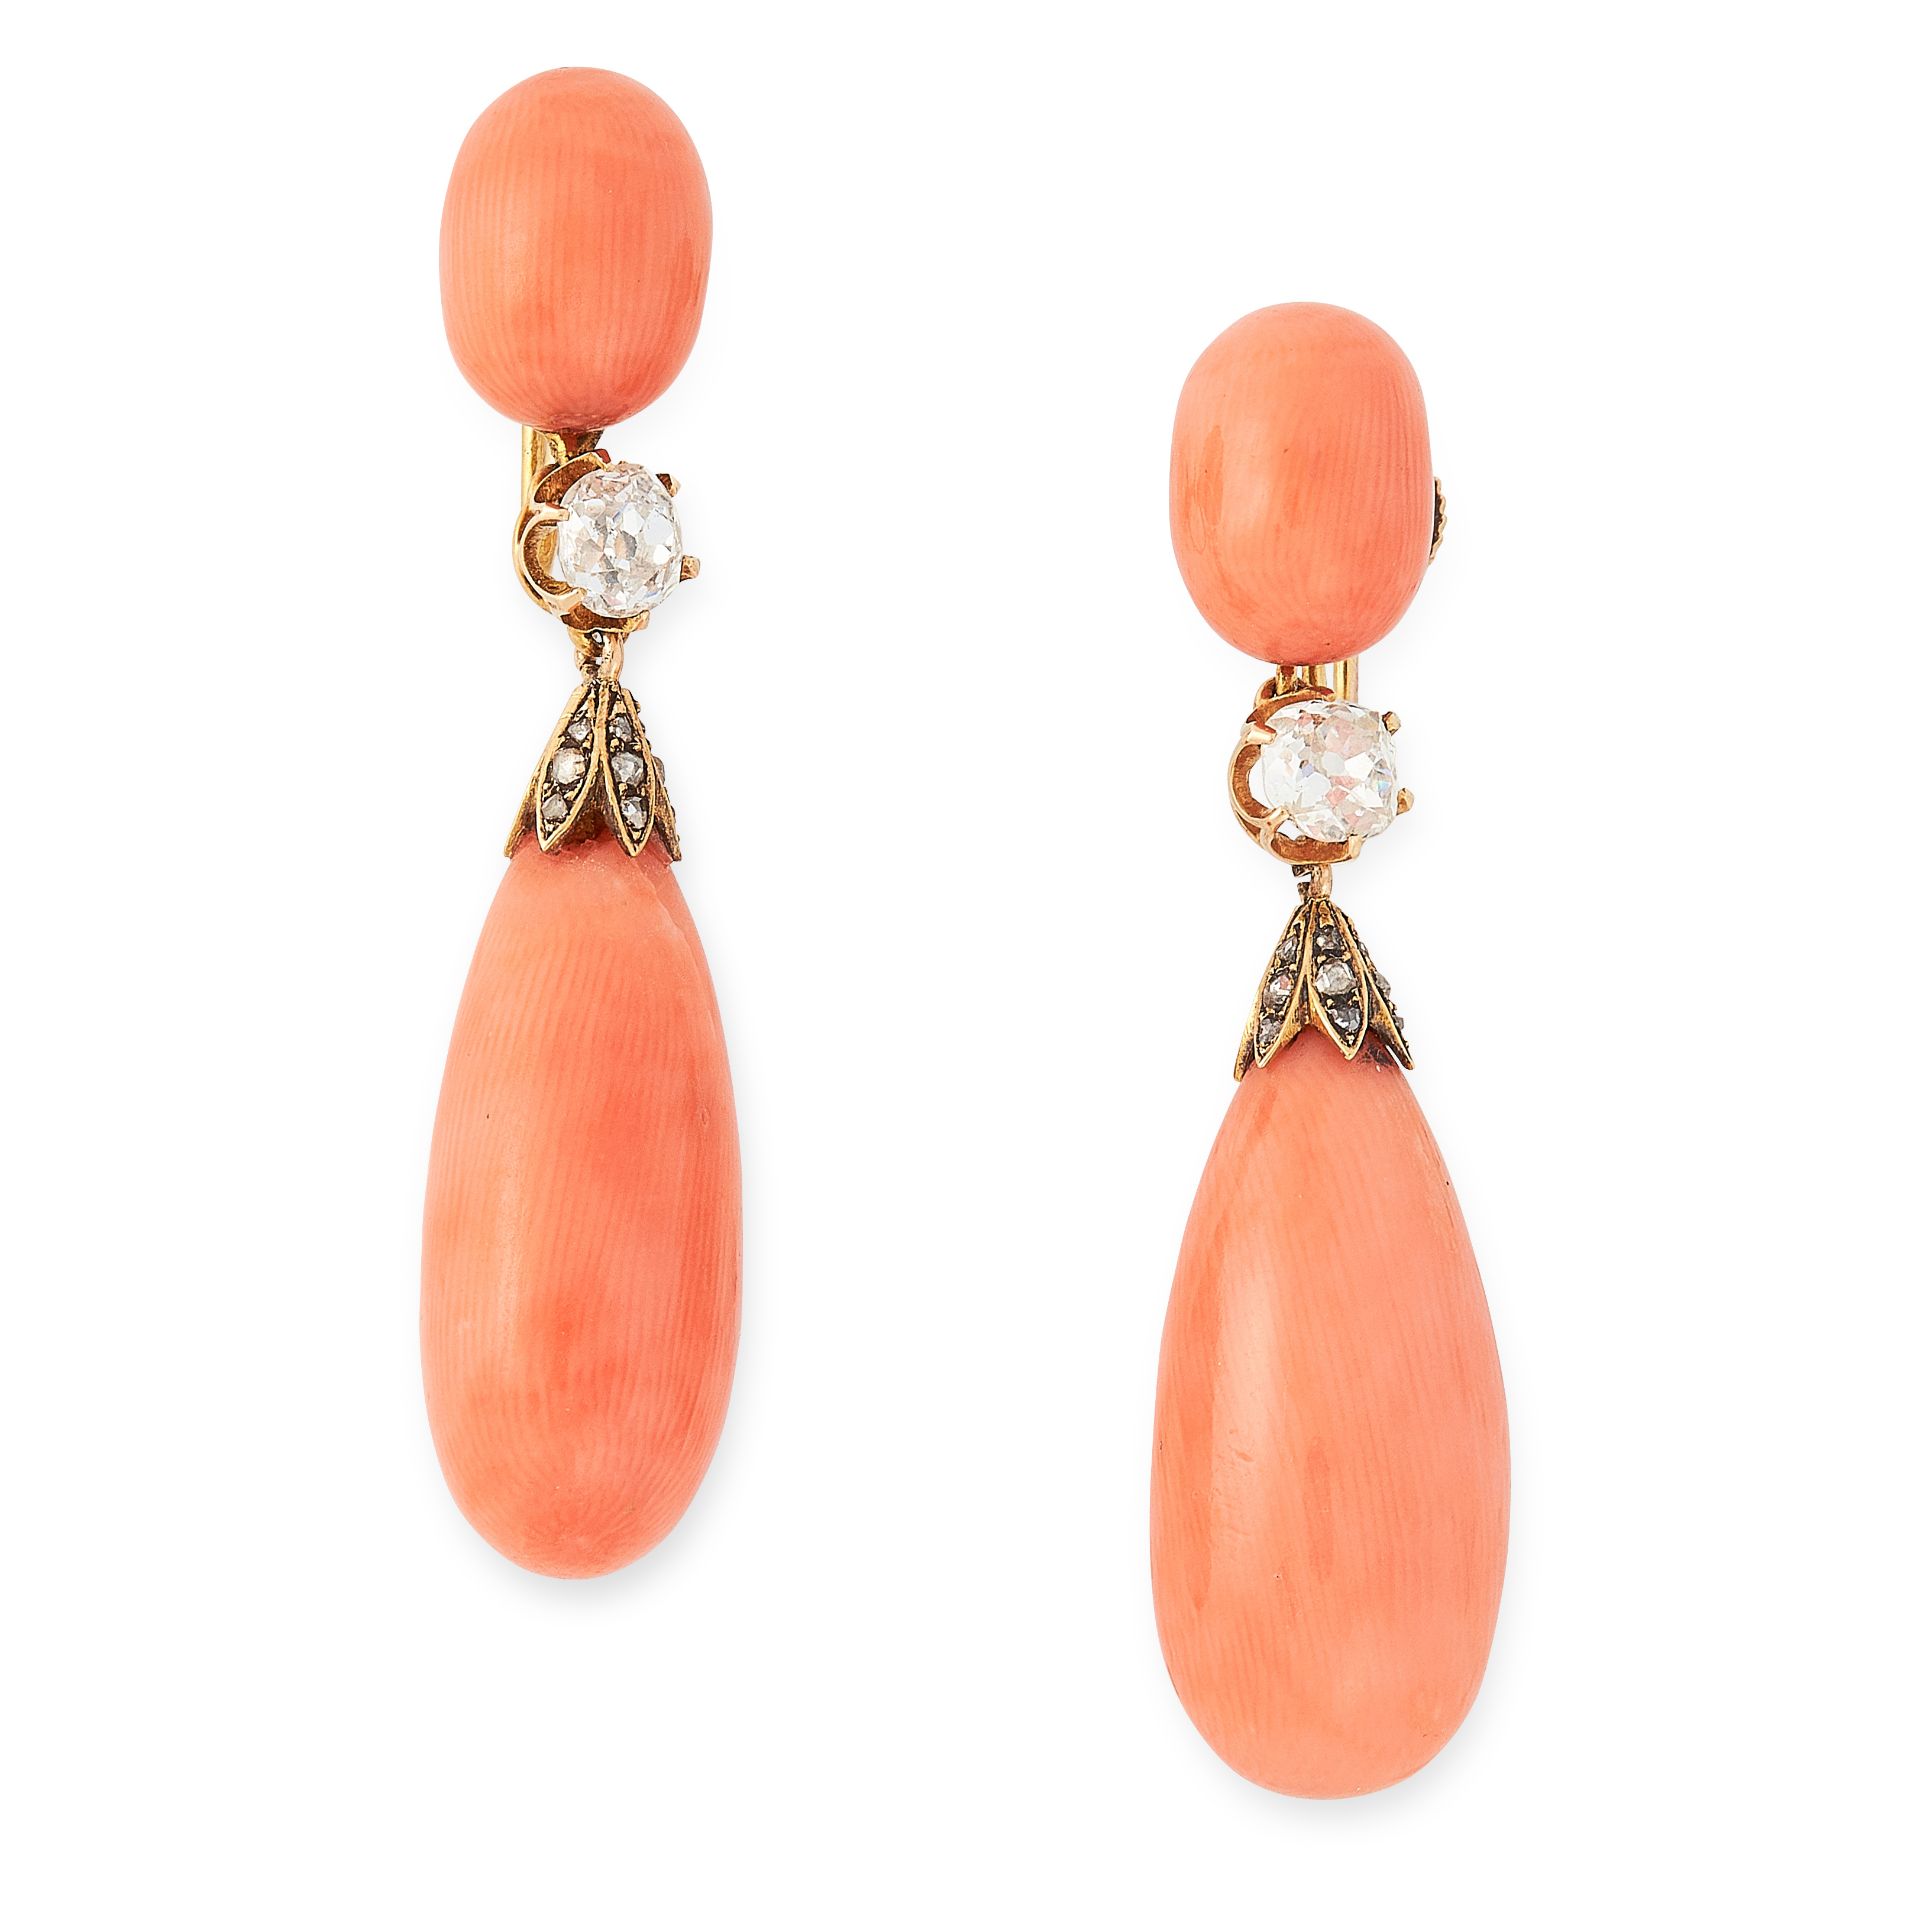 A PAIR OF ANTIQUE CORAL AND DIAMOND EARRINGS in yellow gold, each set with a polished tapering coral